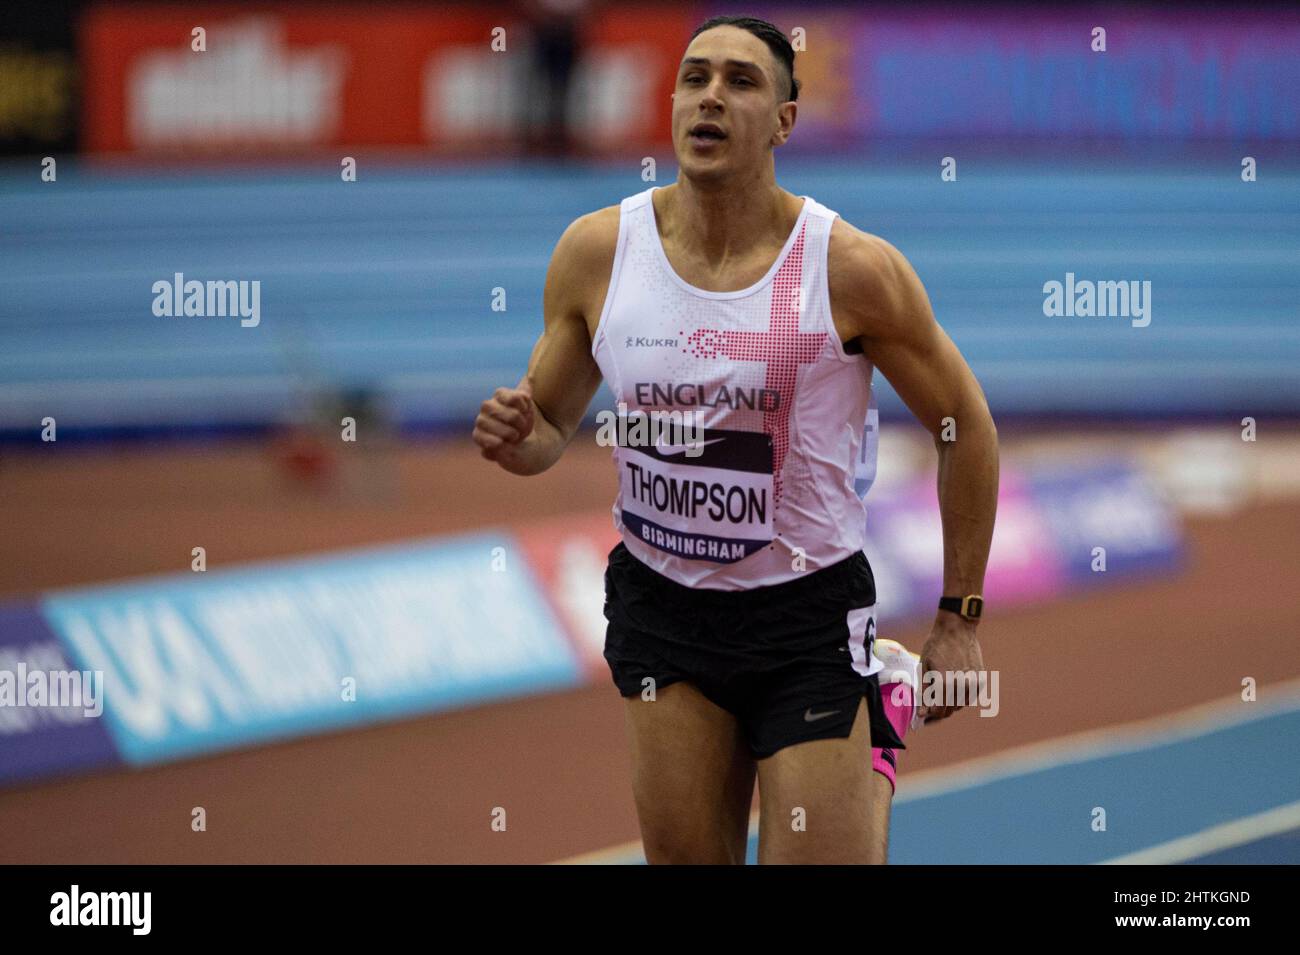 Saturday 26 February 2022: Elliot Thompson ENFIELD & HARINGEY H seen in action at the  UK Athletics Indoor Championships and World Trials  Birmingham Stock Photo